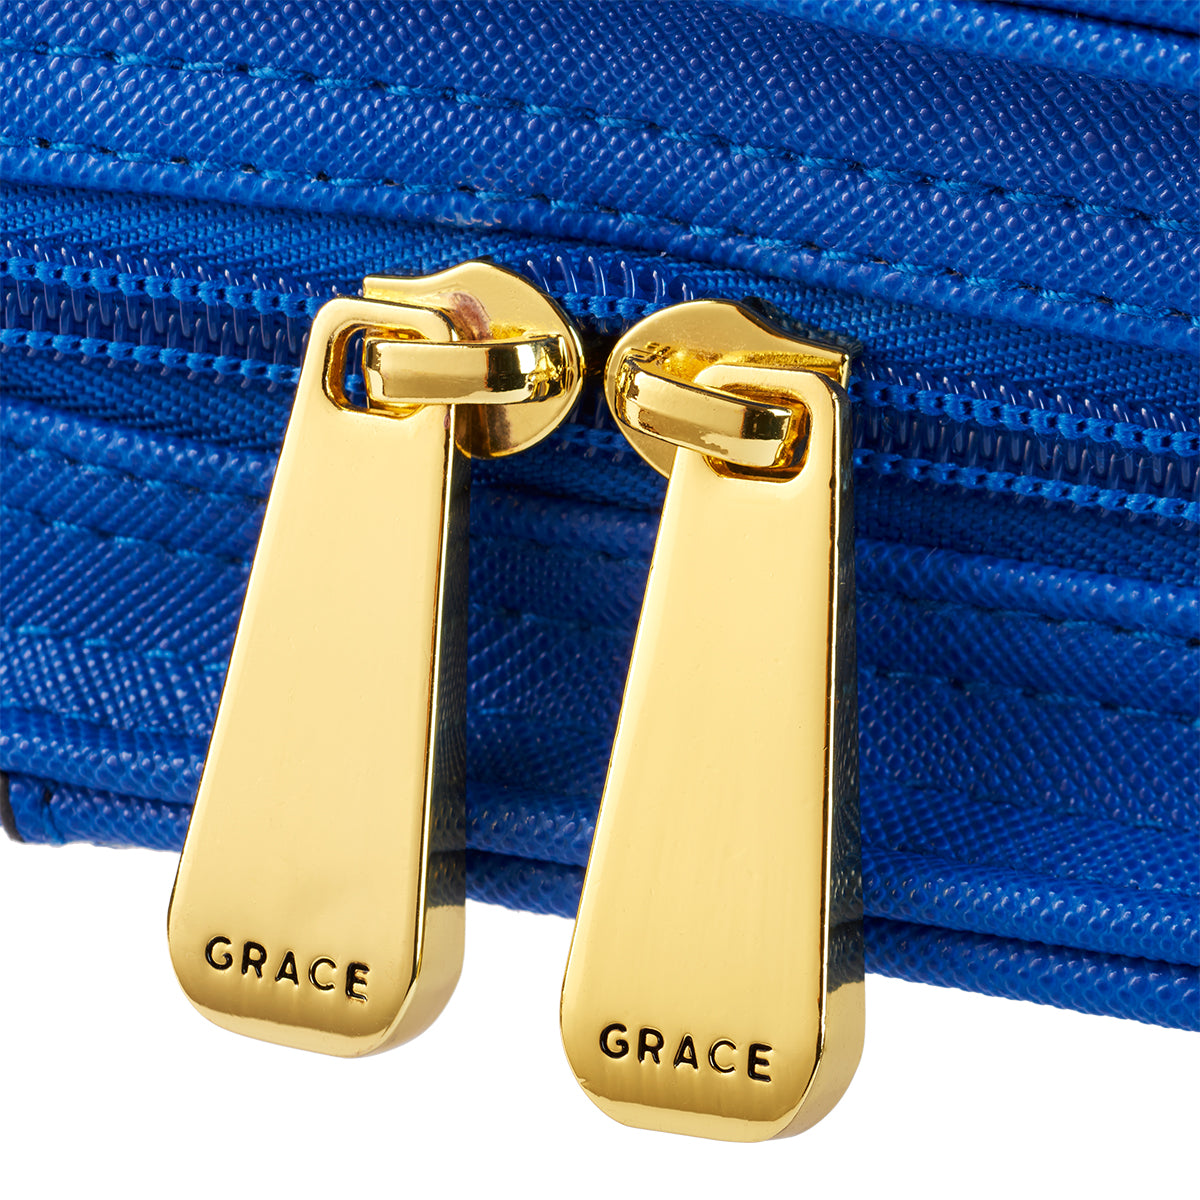 Image of Amazing Grace Blue Faux Leather Purse-style Fashion Bible Cover other